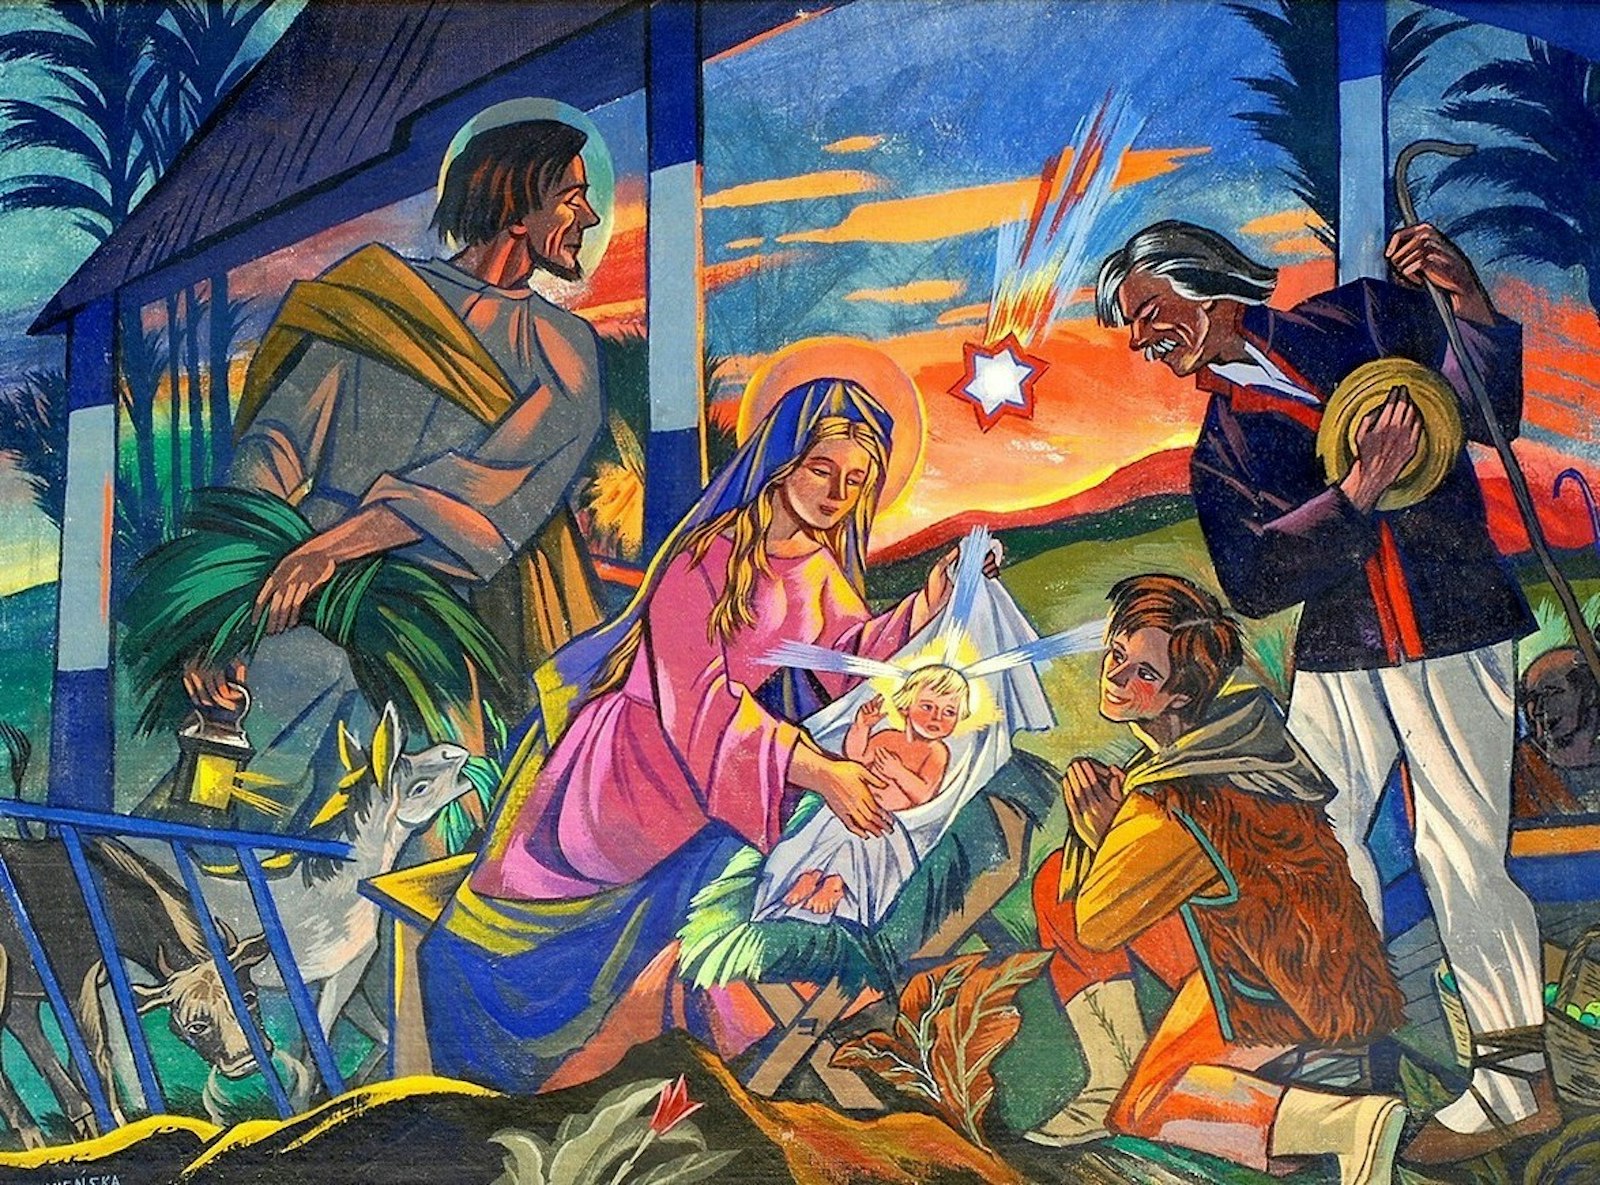 "Adoration of the Shepherds," Zofia Stryjeńska (1891-1976), one of many artistic pieces the Polish Institute for Culture and Research at the Orchard Lake Schools has that Radzilowski wants the institution to better promote. Stryjeńska’s work often combined Polish folk motifs with the art deco style. Her paintings are characterized by clean lines and bright colors showing stylized, ornamental folk designs drawn from regional dress and architecture. (Photo courtesy of the Polish Institute for Culture and Research)